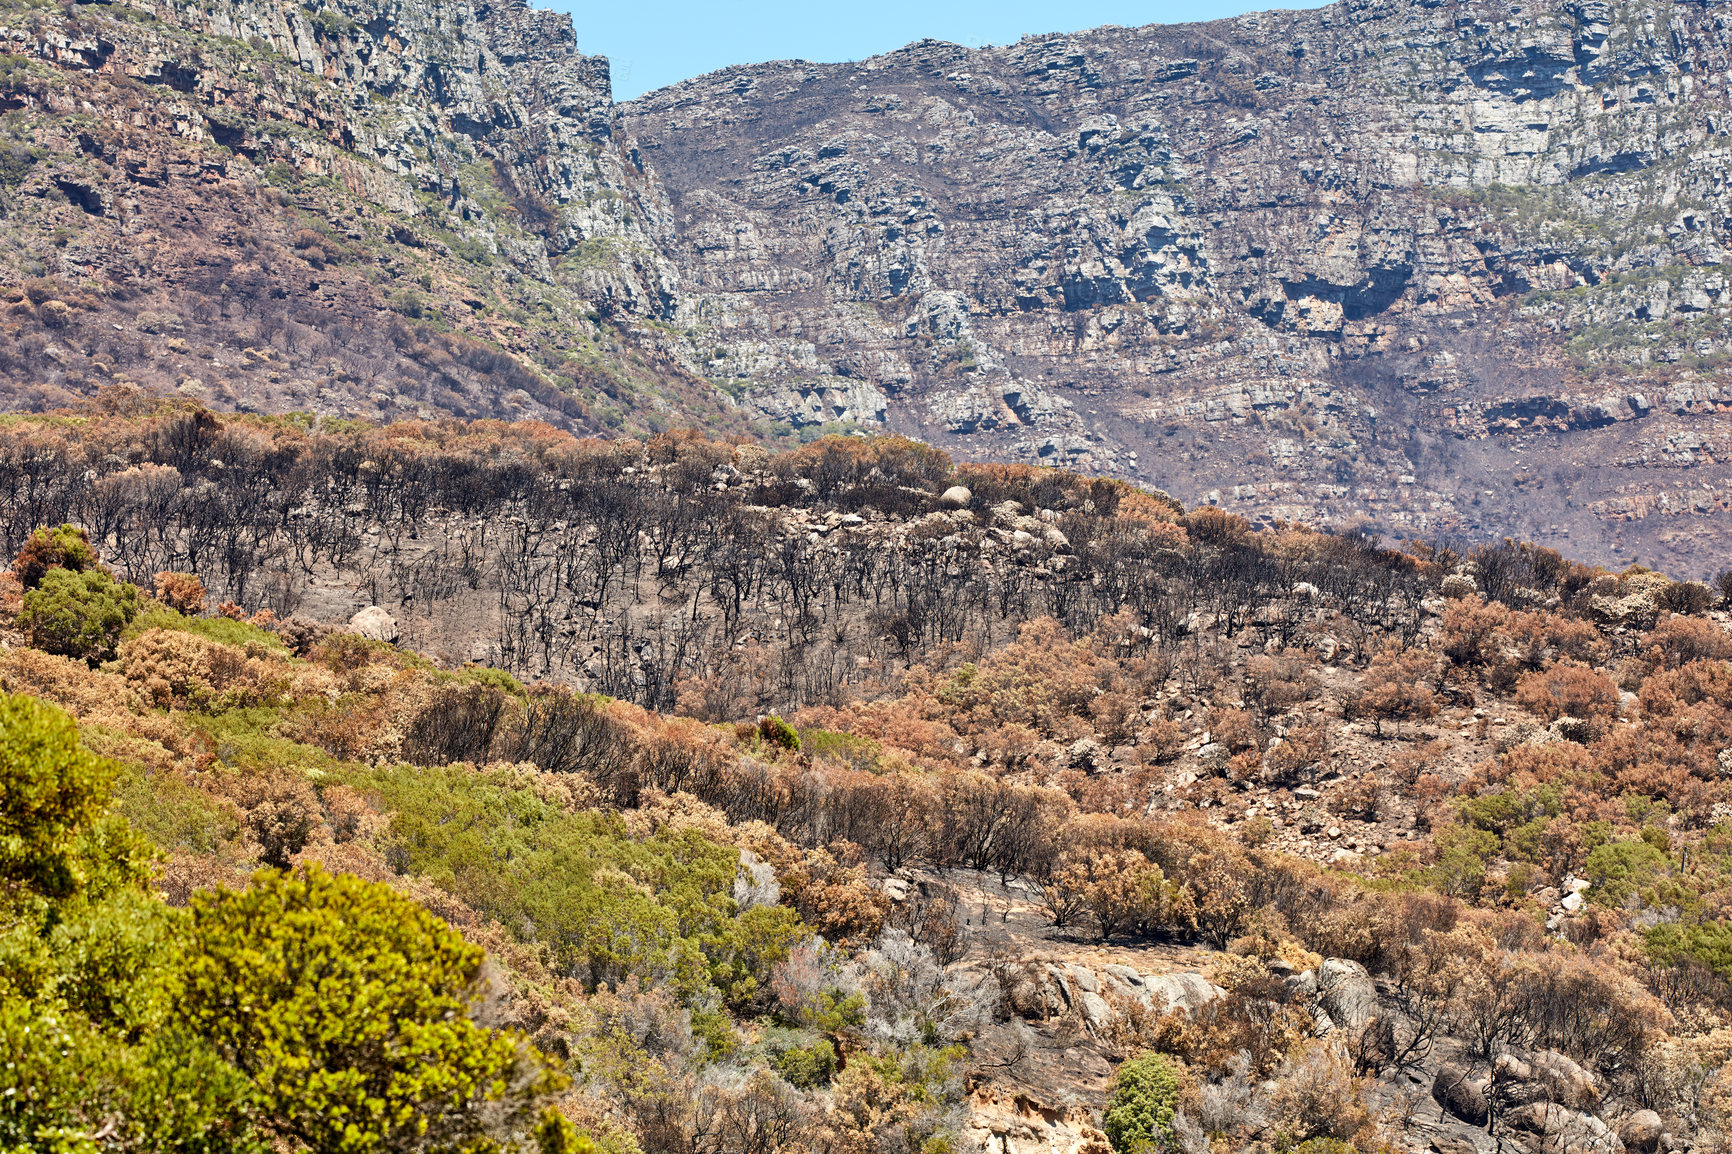 Buy stock photo Burnt trees after a bushfire on Table Mountain in Cape Town.  Landscape of rocks and thorny bushes after wildfire in the wilderness. Rocky mountain view near forest fire with lots of black dead trees